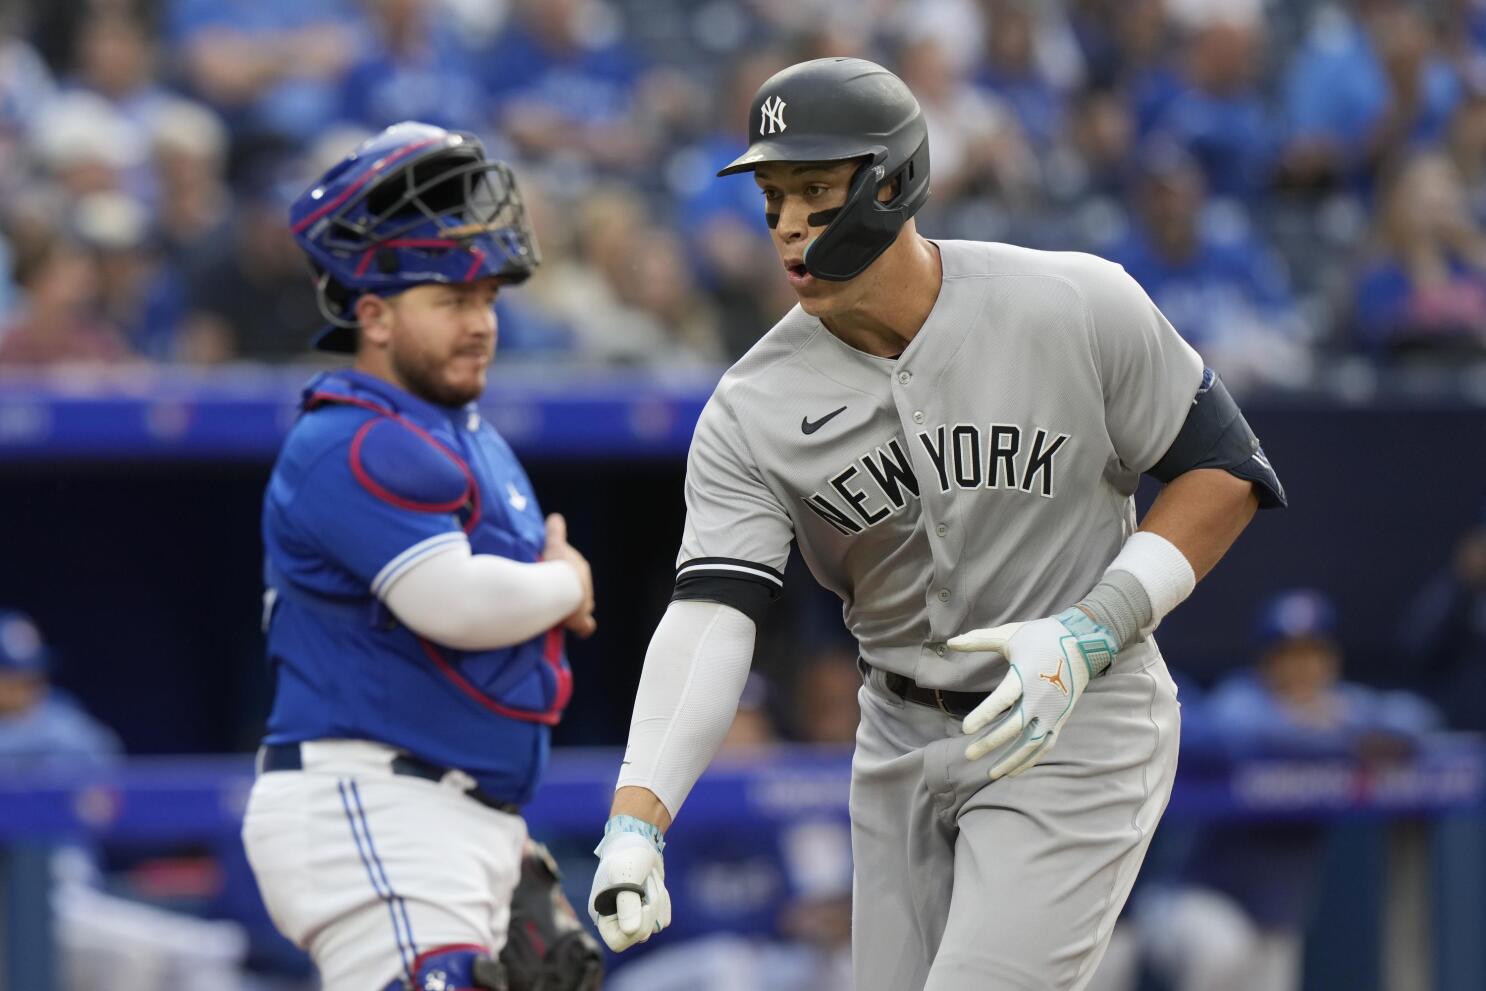 Yankees slugger Aaron Judge sparks controversy with glance at